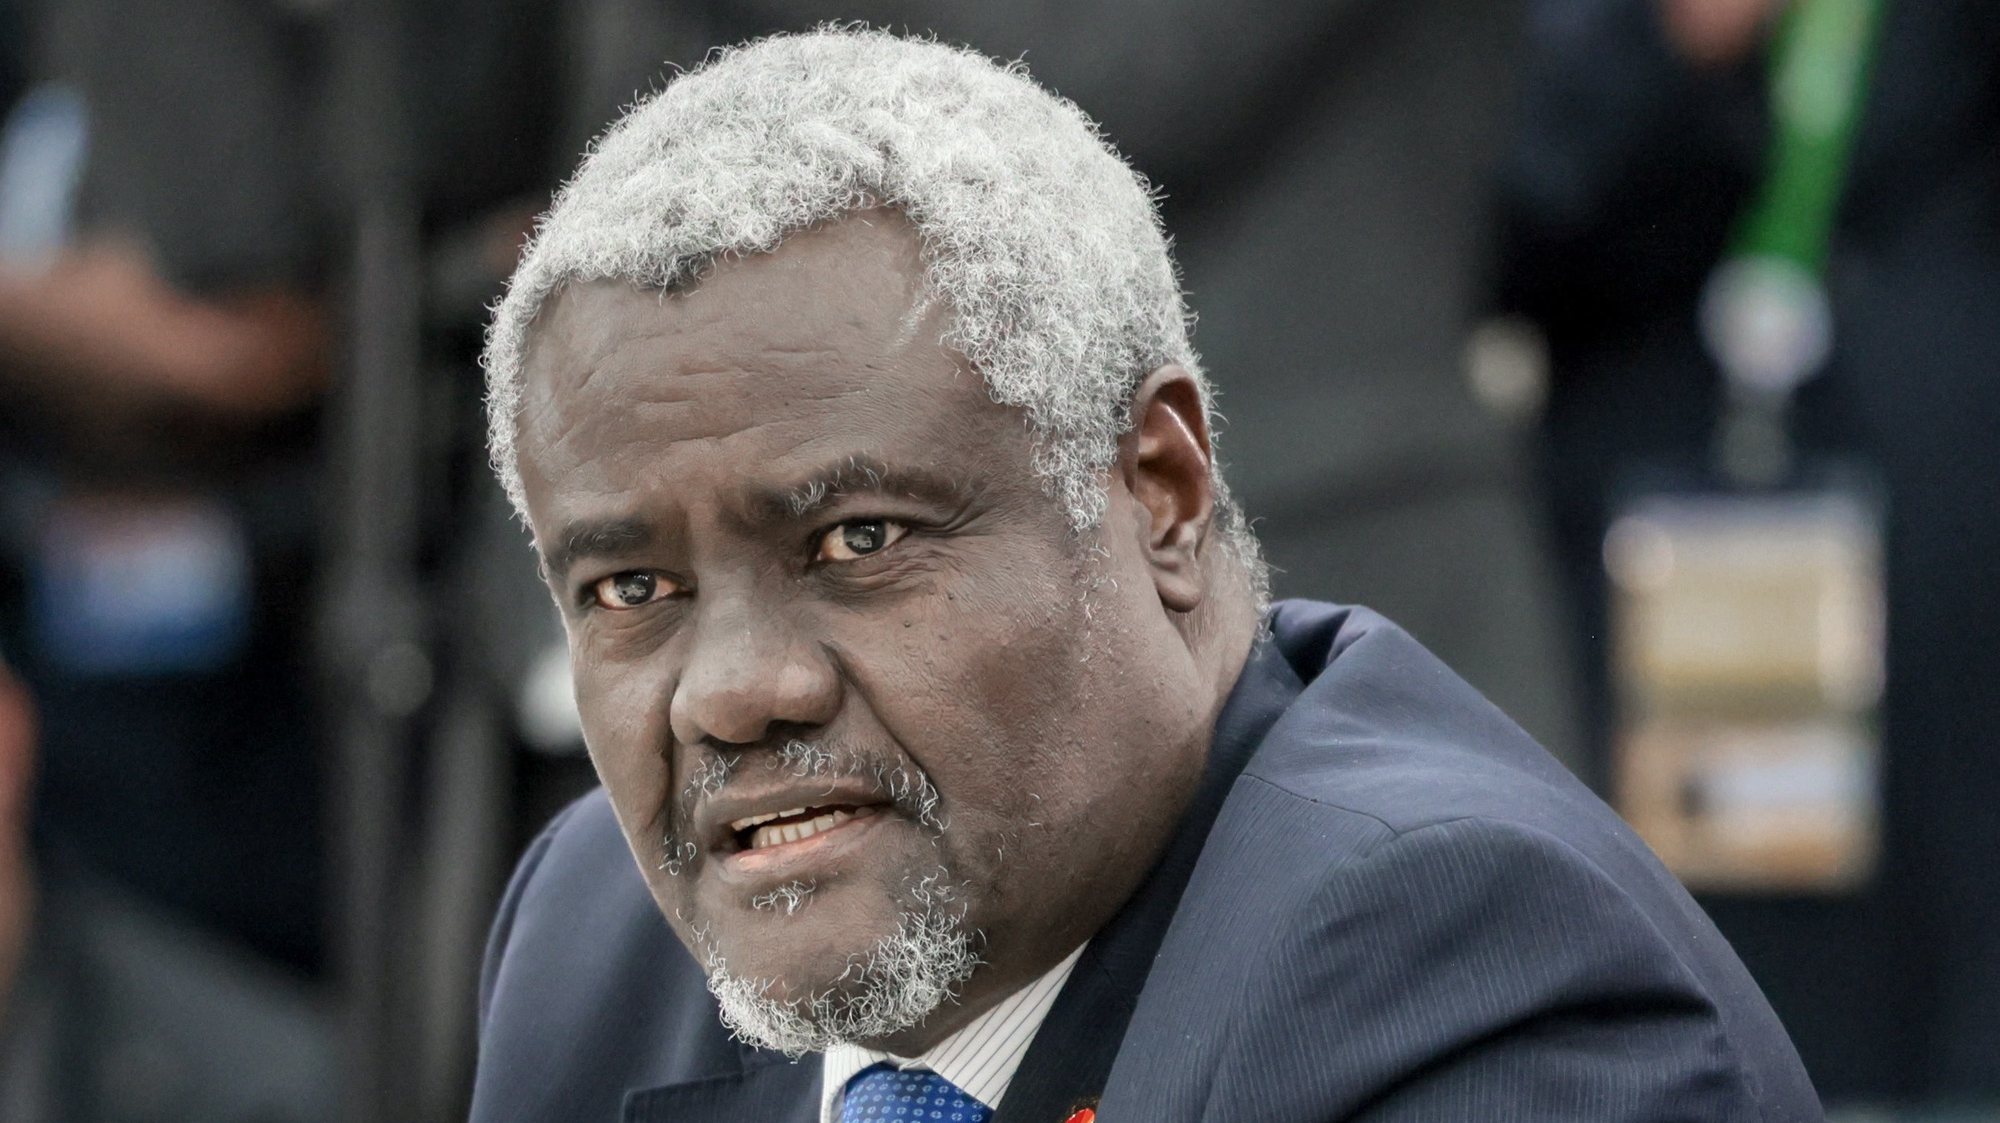 epa10771866 A handout photo made available by TASS Host Photo Agency shows Сhairperson of the African Union Commission (AUC), Moussa Faki Mahamat, during a working breakfast of heads of regional organizations in Africa with the participation of Russian President Vladimir Putin, at the Second Summit Economic and Humanitarian Forum &#039;Russia-Africa&#039; in St.Petersburg, Russia, 27 July 2023. The Second Summit Economic and Humanitarian Forum &#039;Russia-Africa&#039; will take place from July 27 to 28 at the congress-exhibition center Expoforum in St.Petersburg.  EPA/Mikhail Metzel / TASS Host Photo Agency / HANDOUT MANDATORY CREDIT HANDOUT EDITORIAL USE ONLY/NO SALES